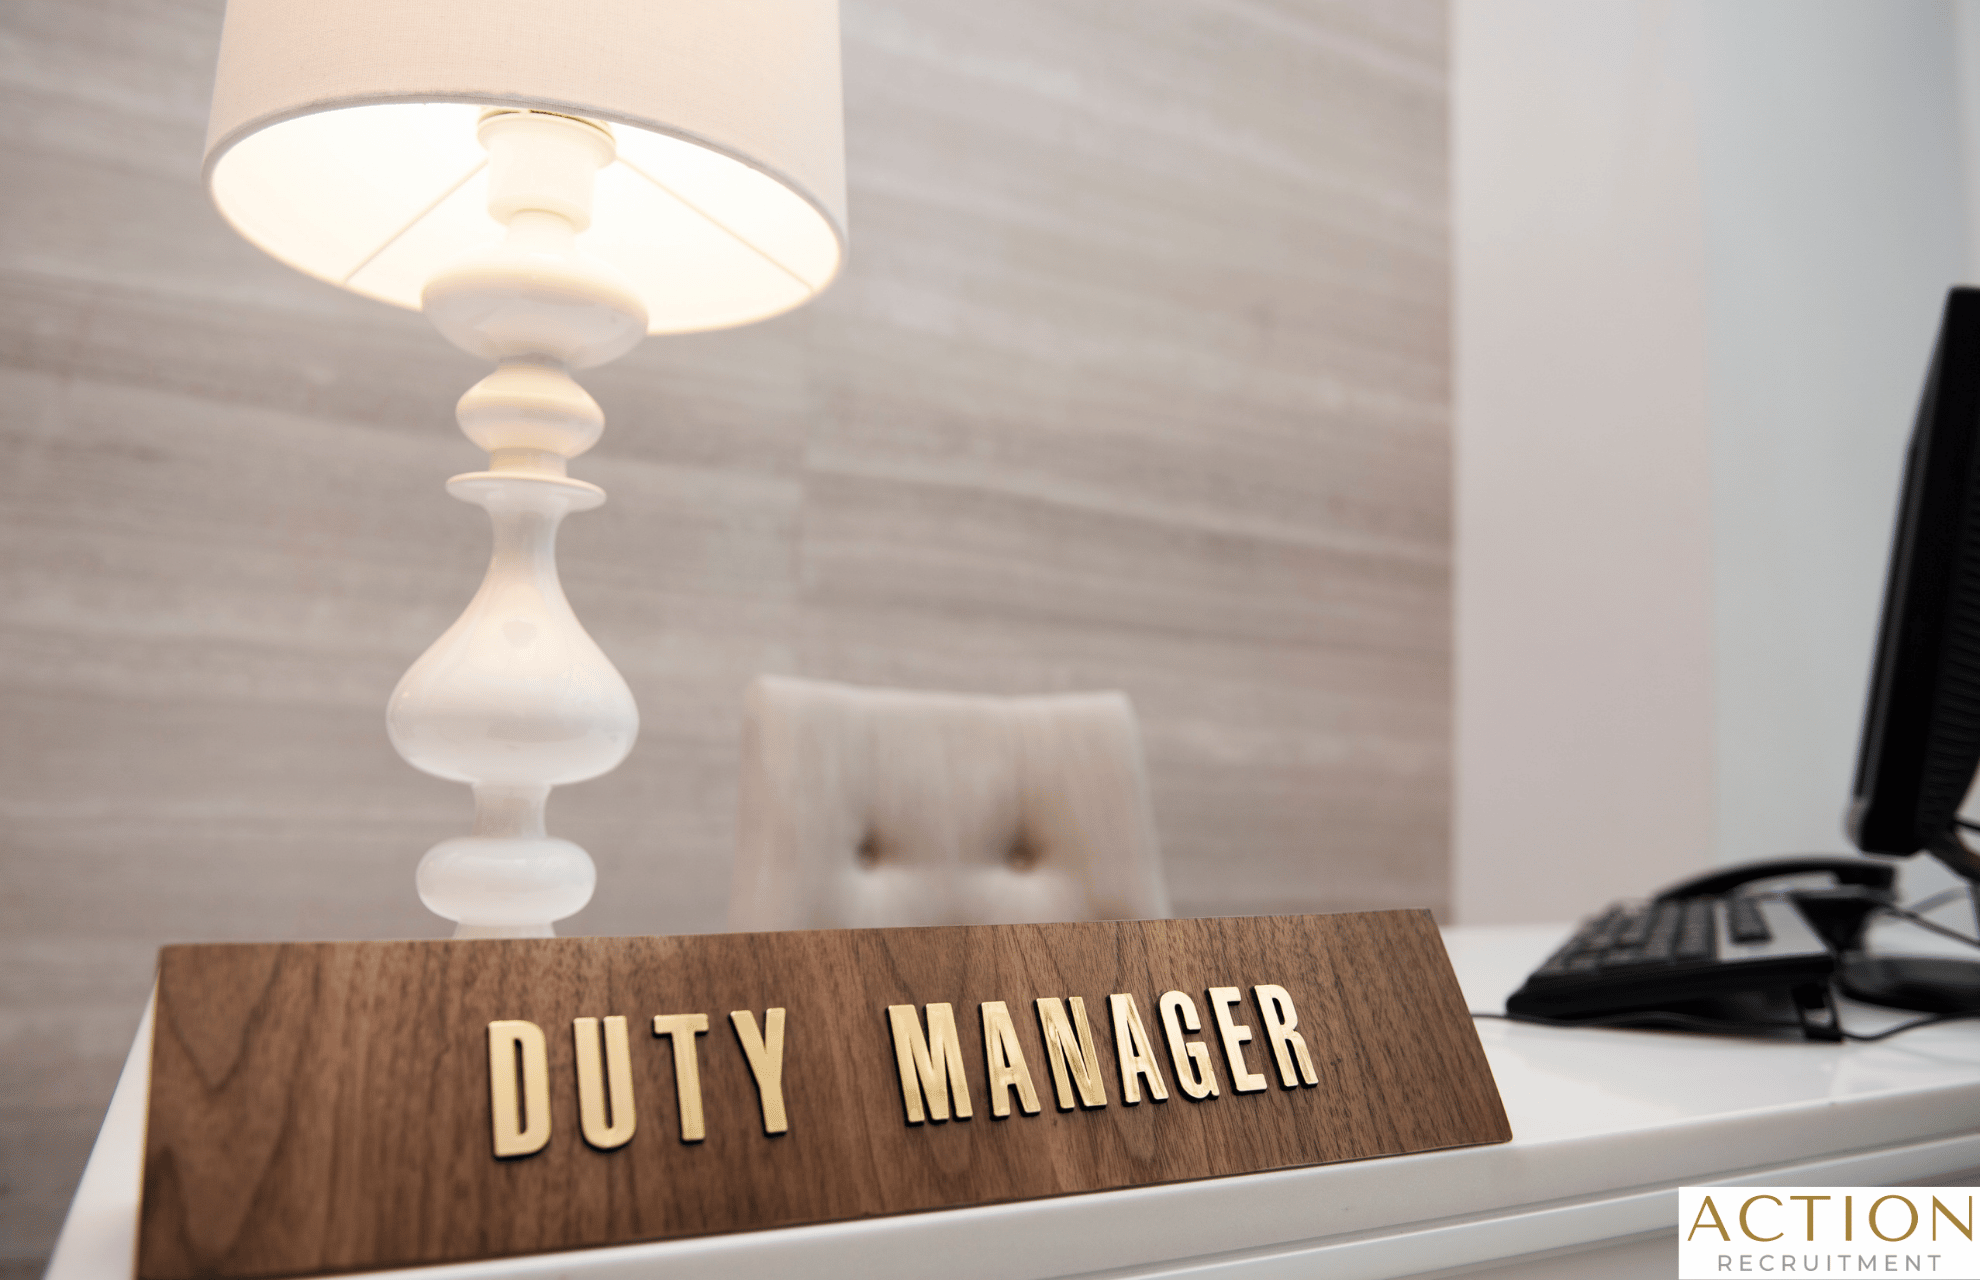 Hotel Duty Manager Jobs